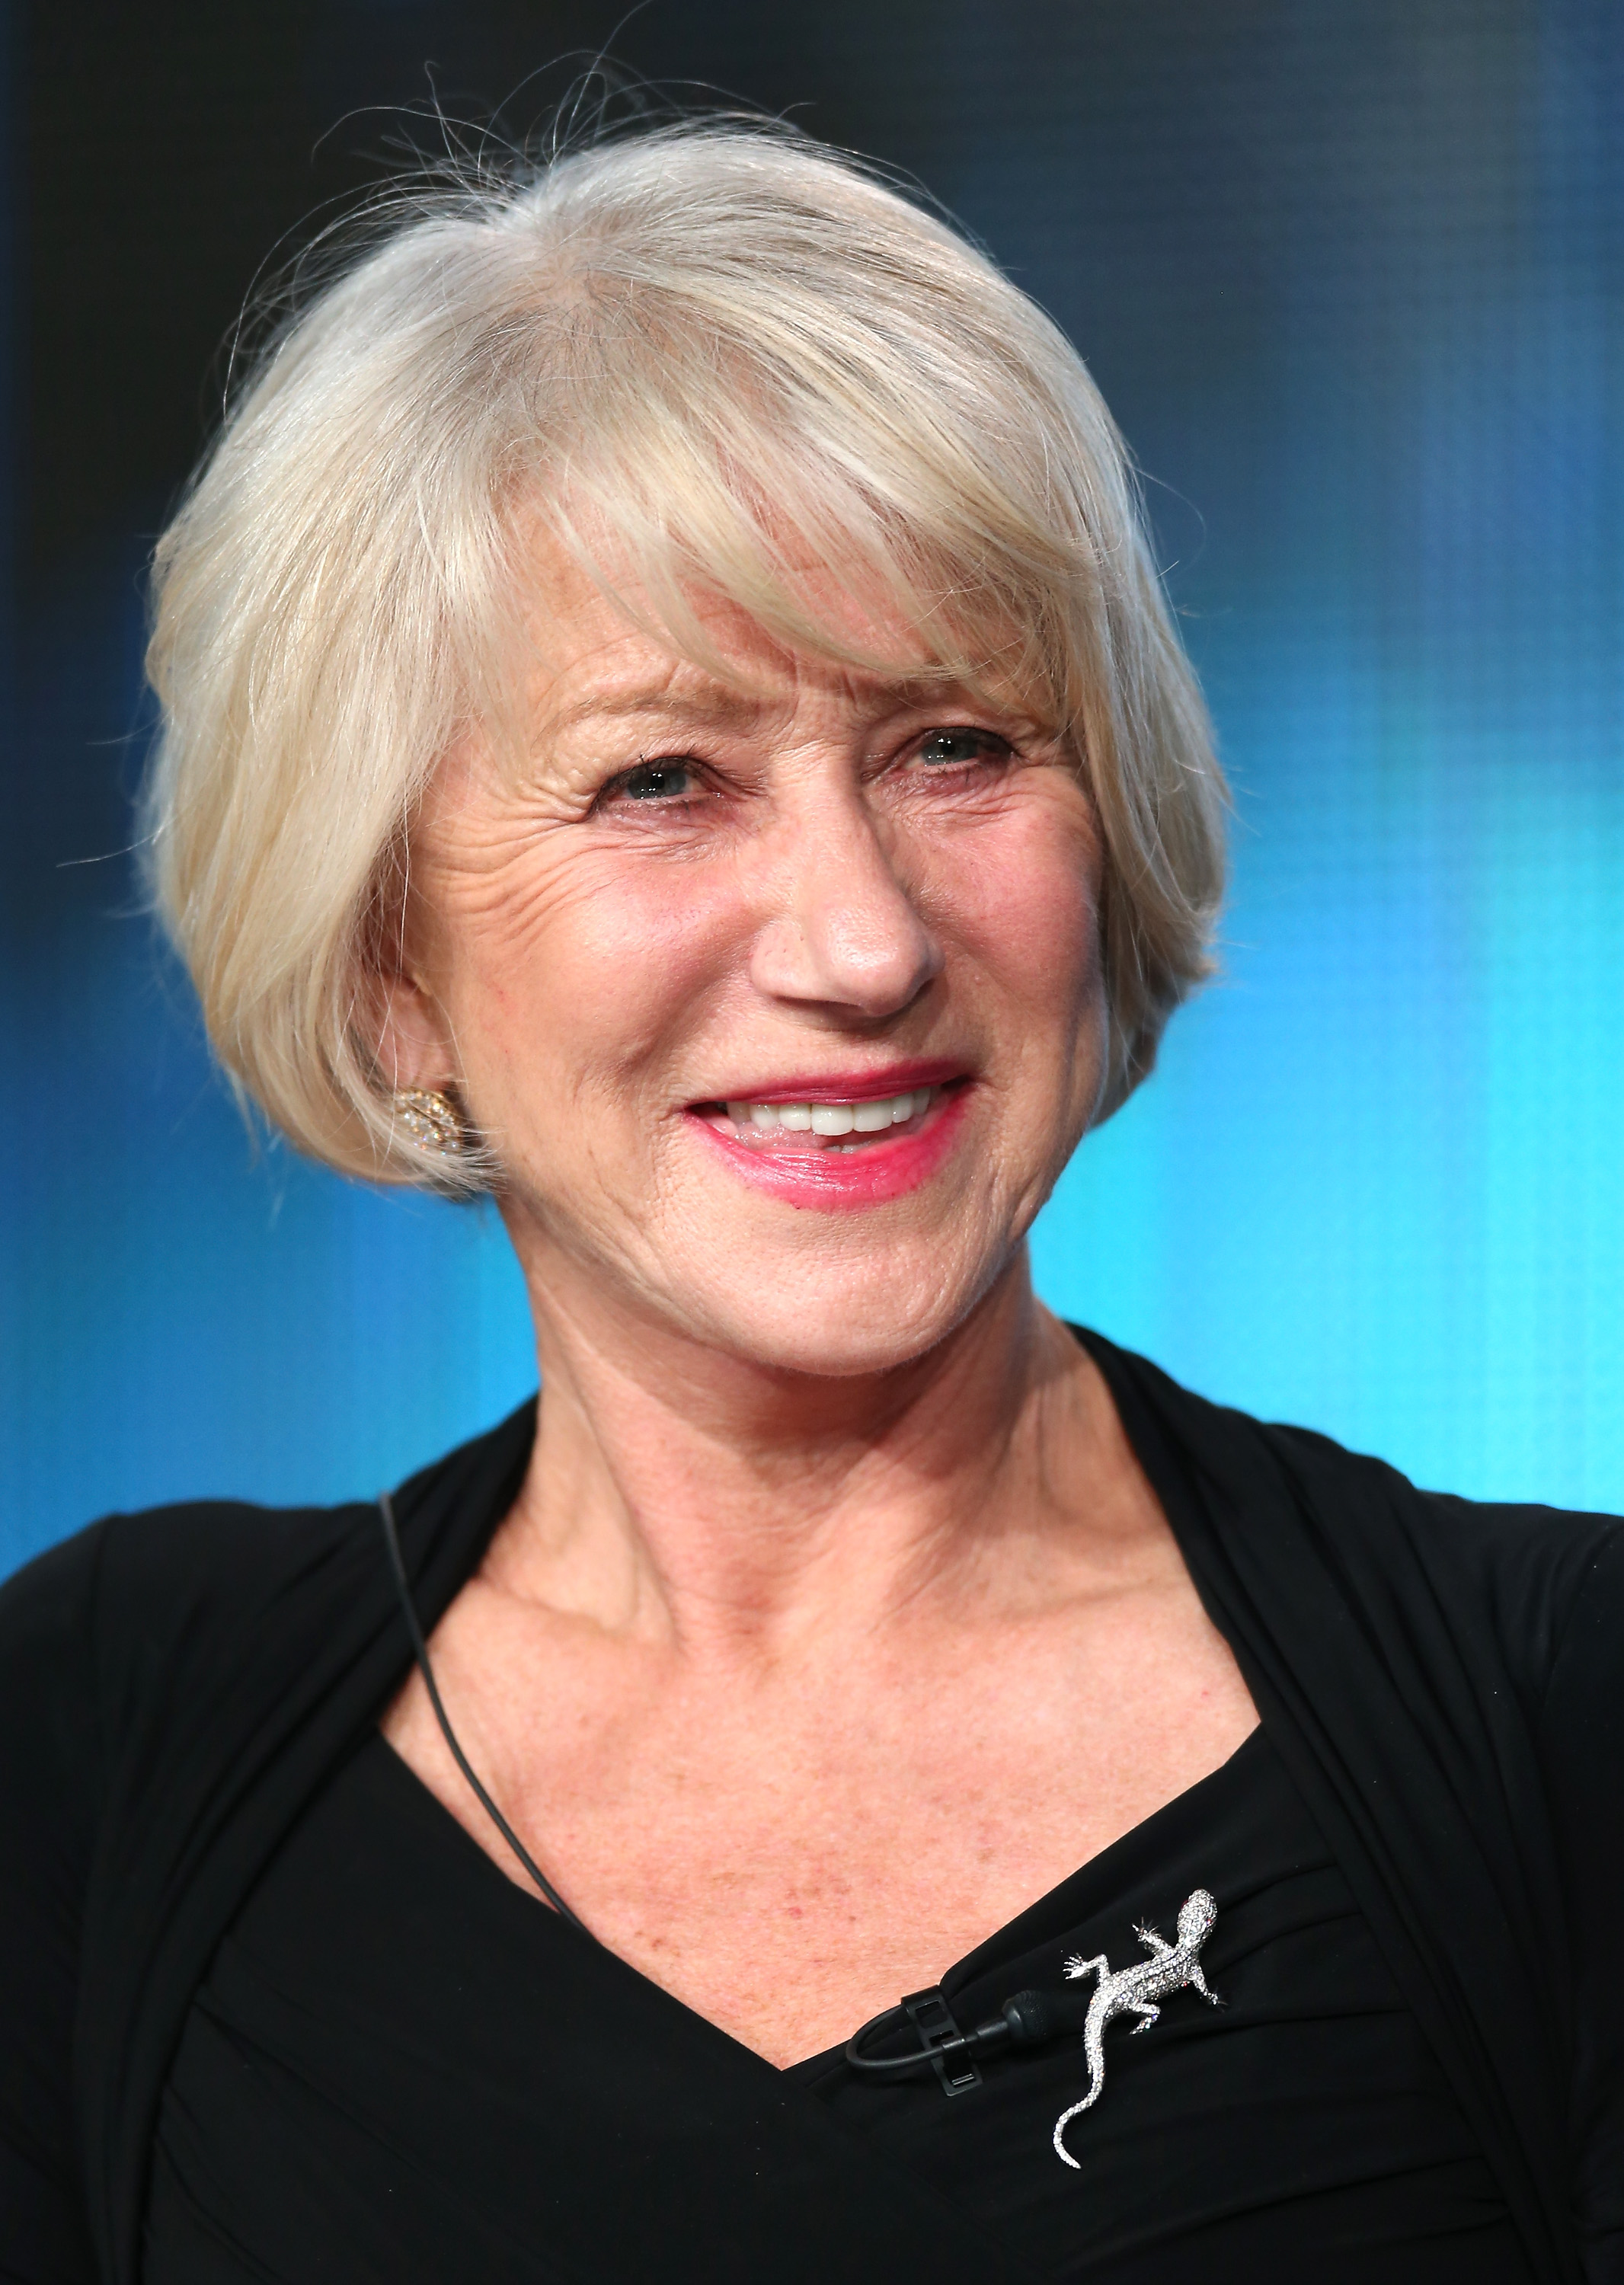 Helen Mirren during the Winter TCA Tour - Day 1 at Langham Hotel on January 4, 2013, in Pasadena, California. | Source: Getty Images